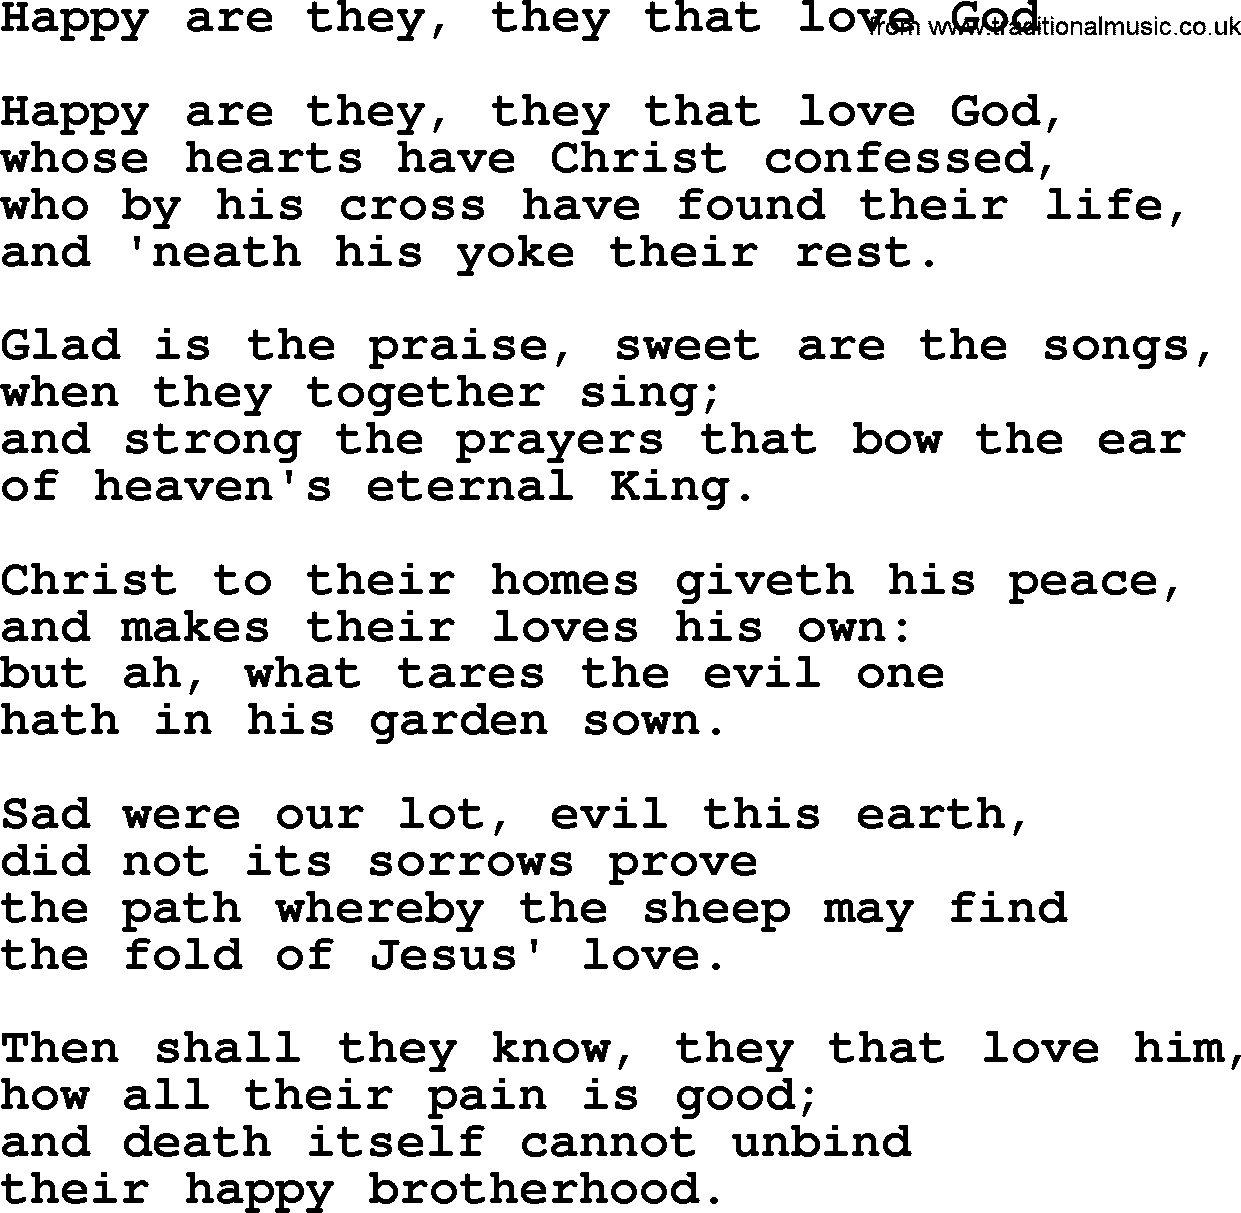 Christmas Hymns, Carols and Songs, title: Happy Are They, They That Love God, lyrics with PDF